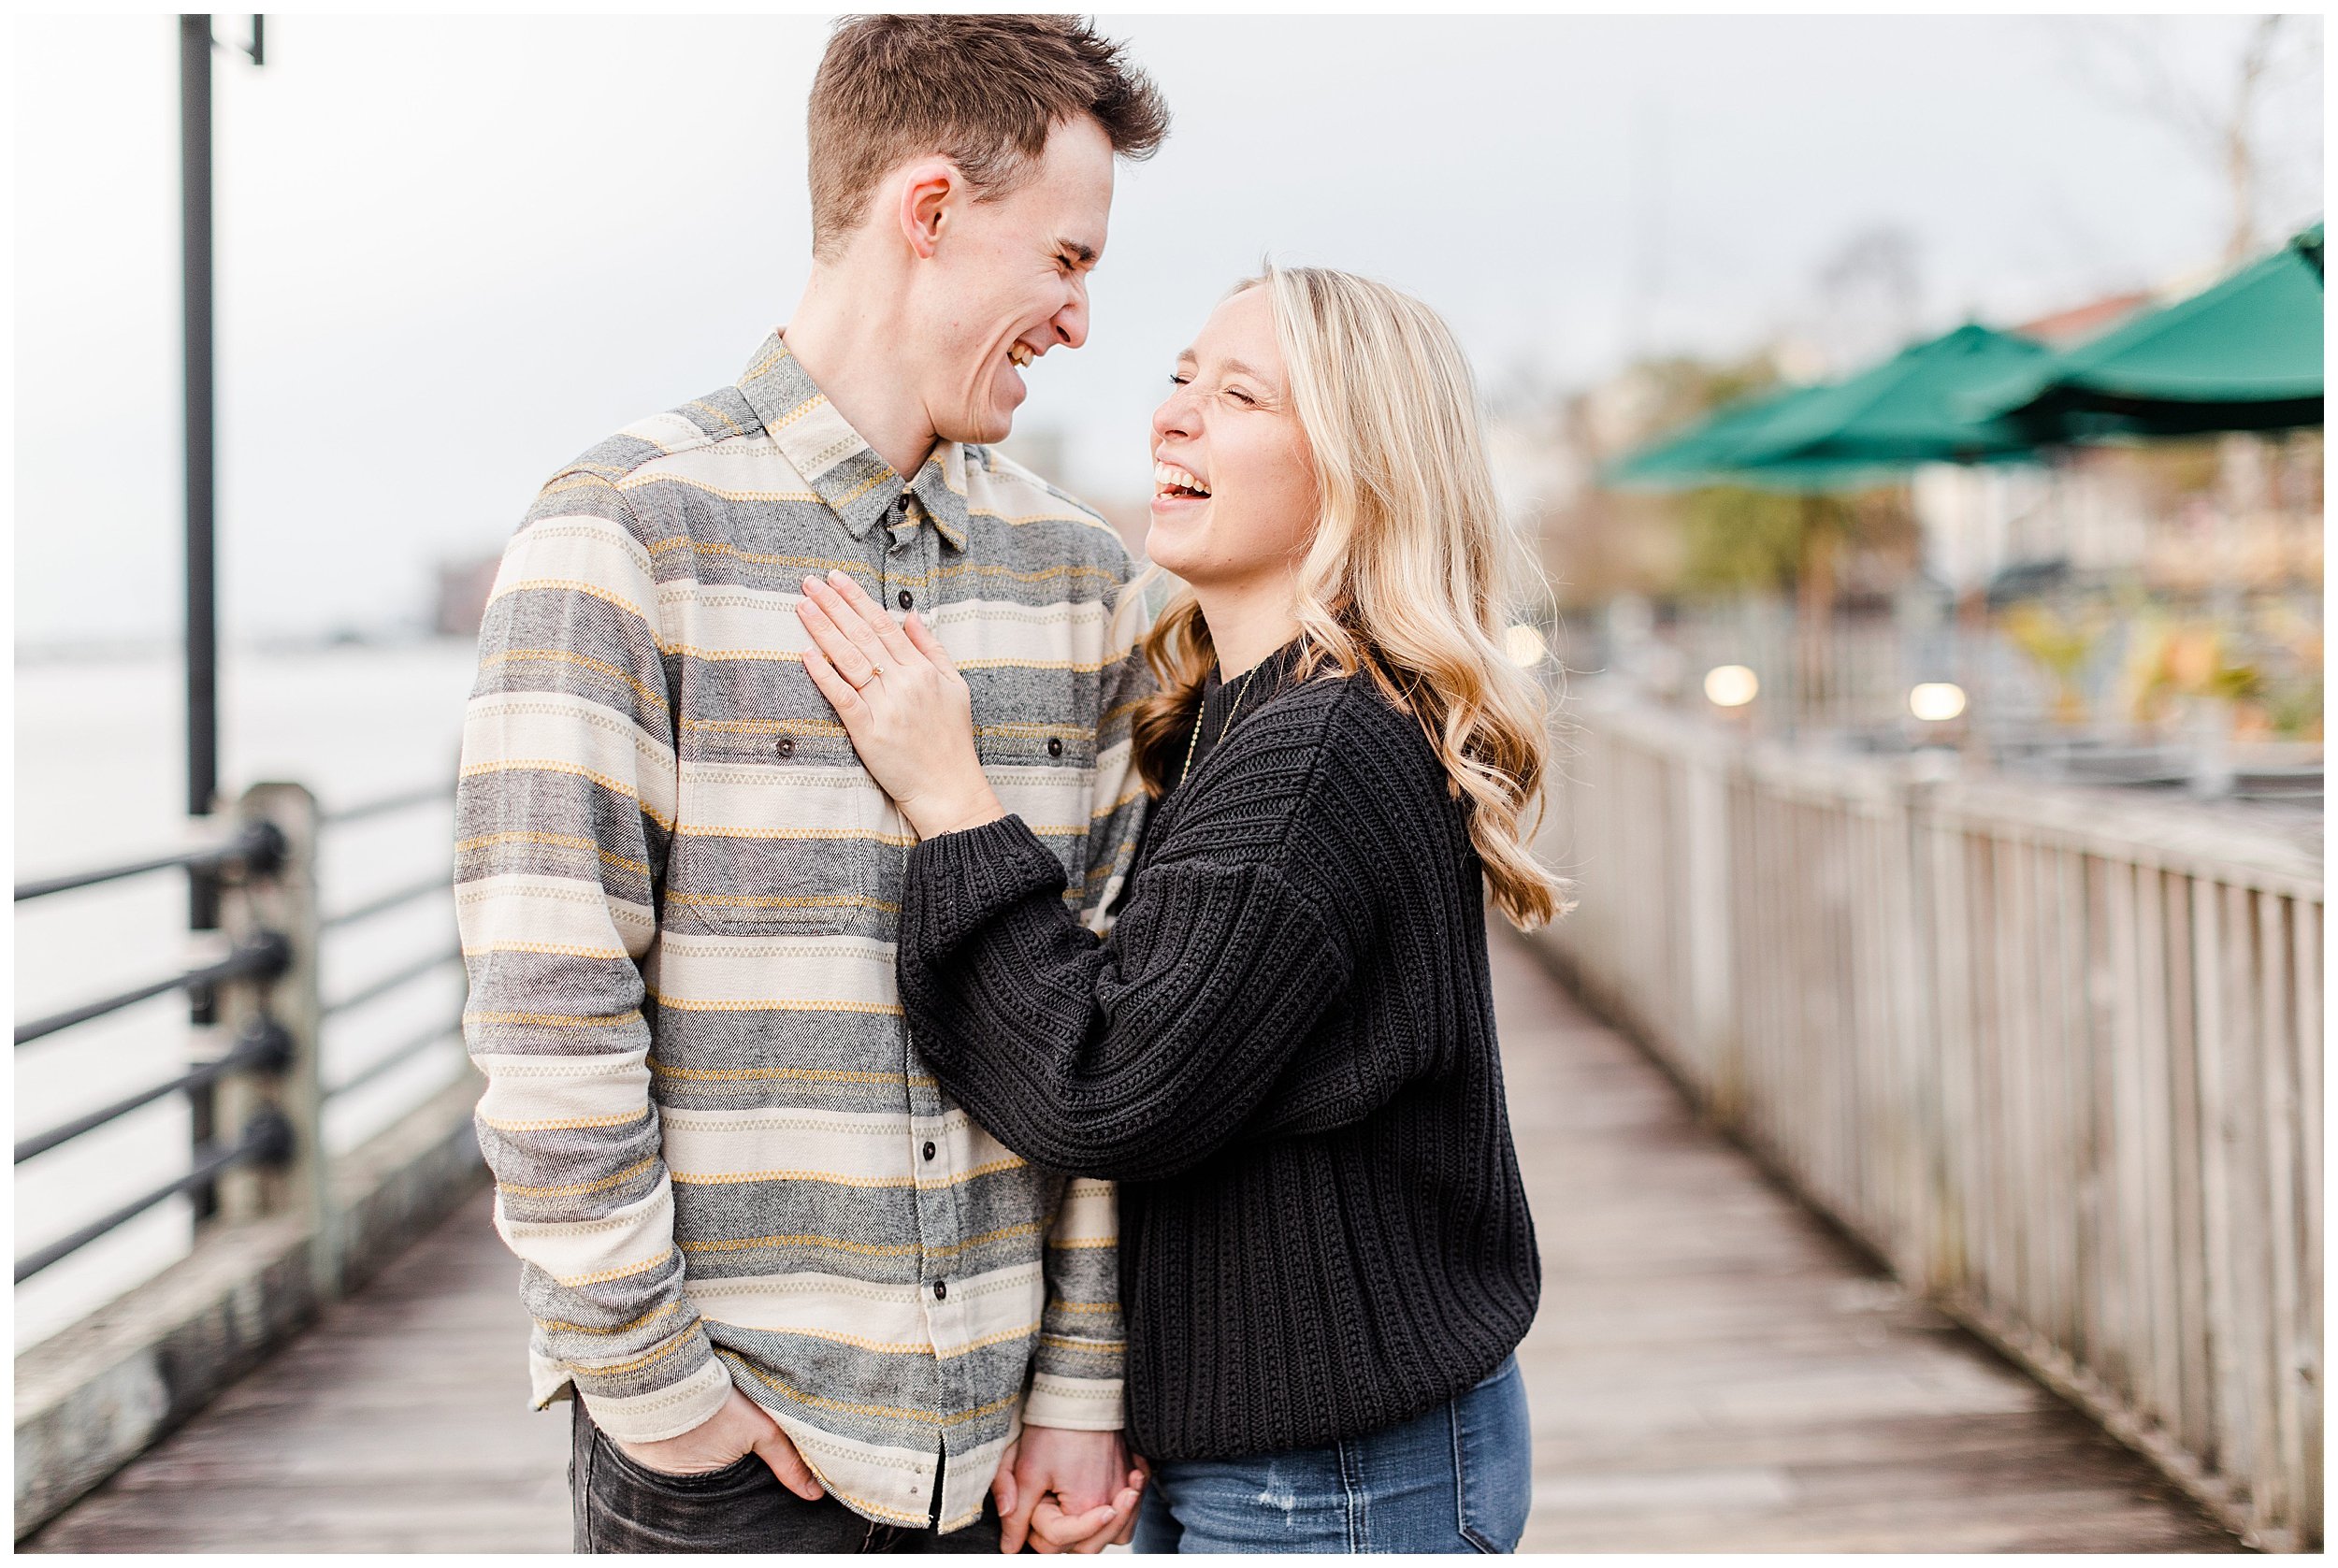 wilmington riverwalk and historic district engagement session ashley christ photography wilmington wedding photographer_0074.jpg